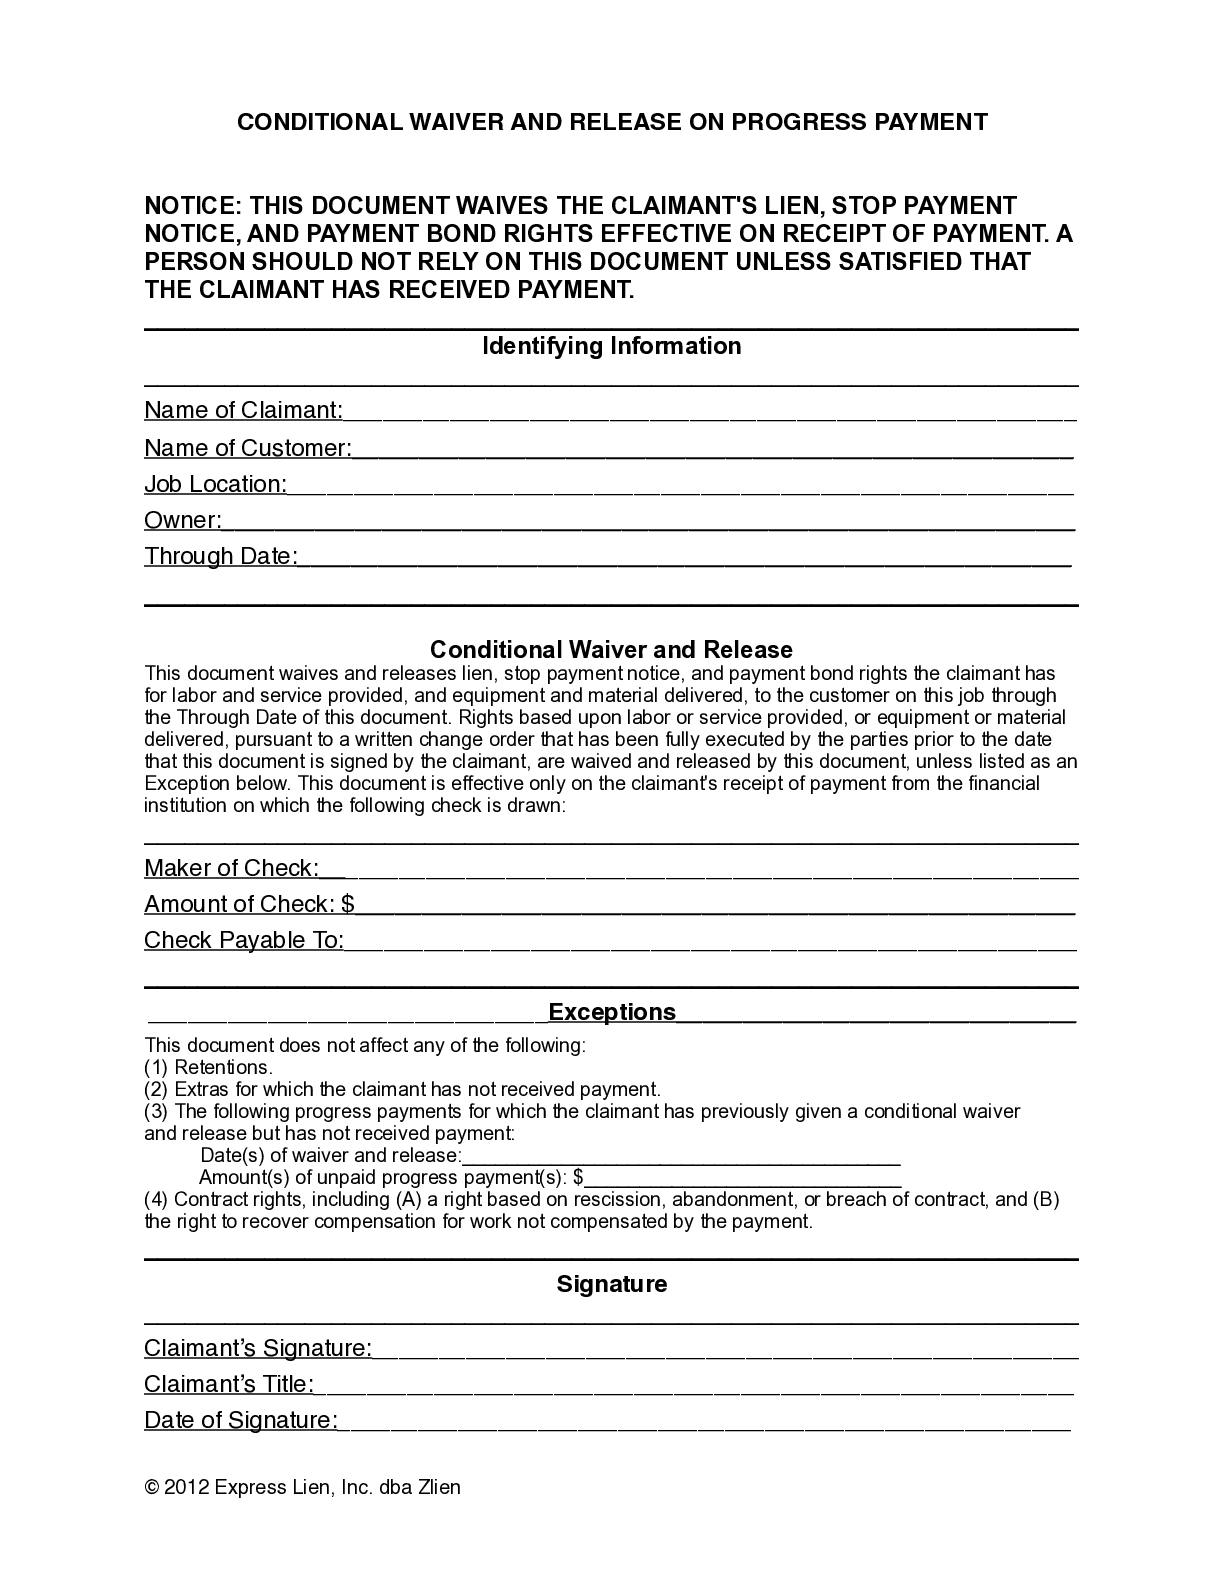 Idaho Partial Conditional Lien Waiver Form - free from